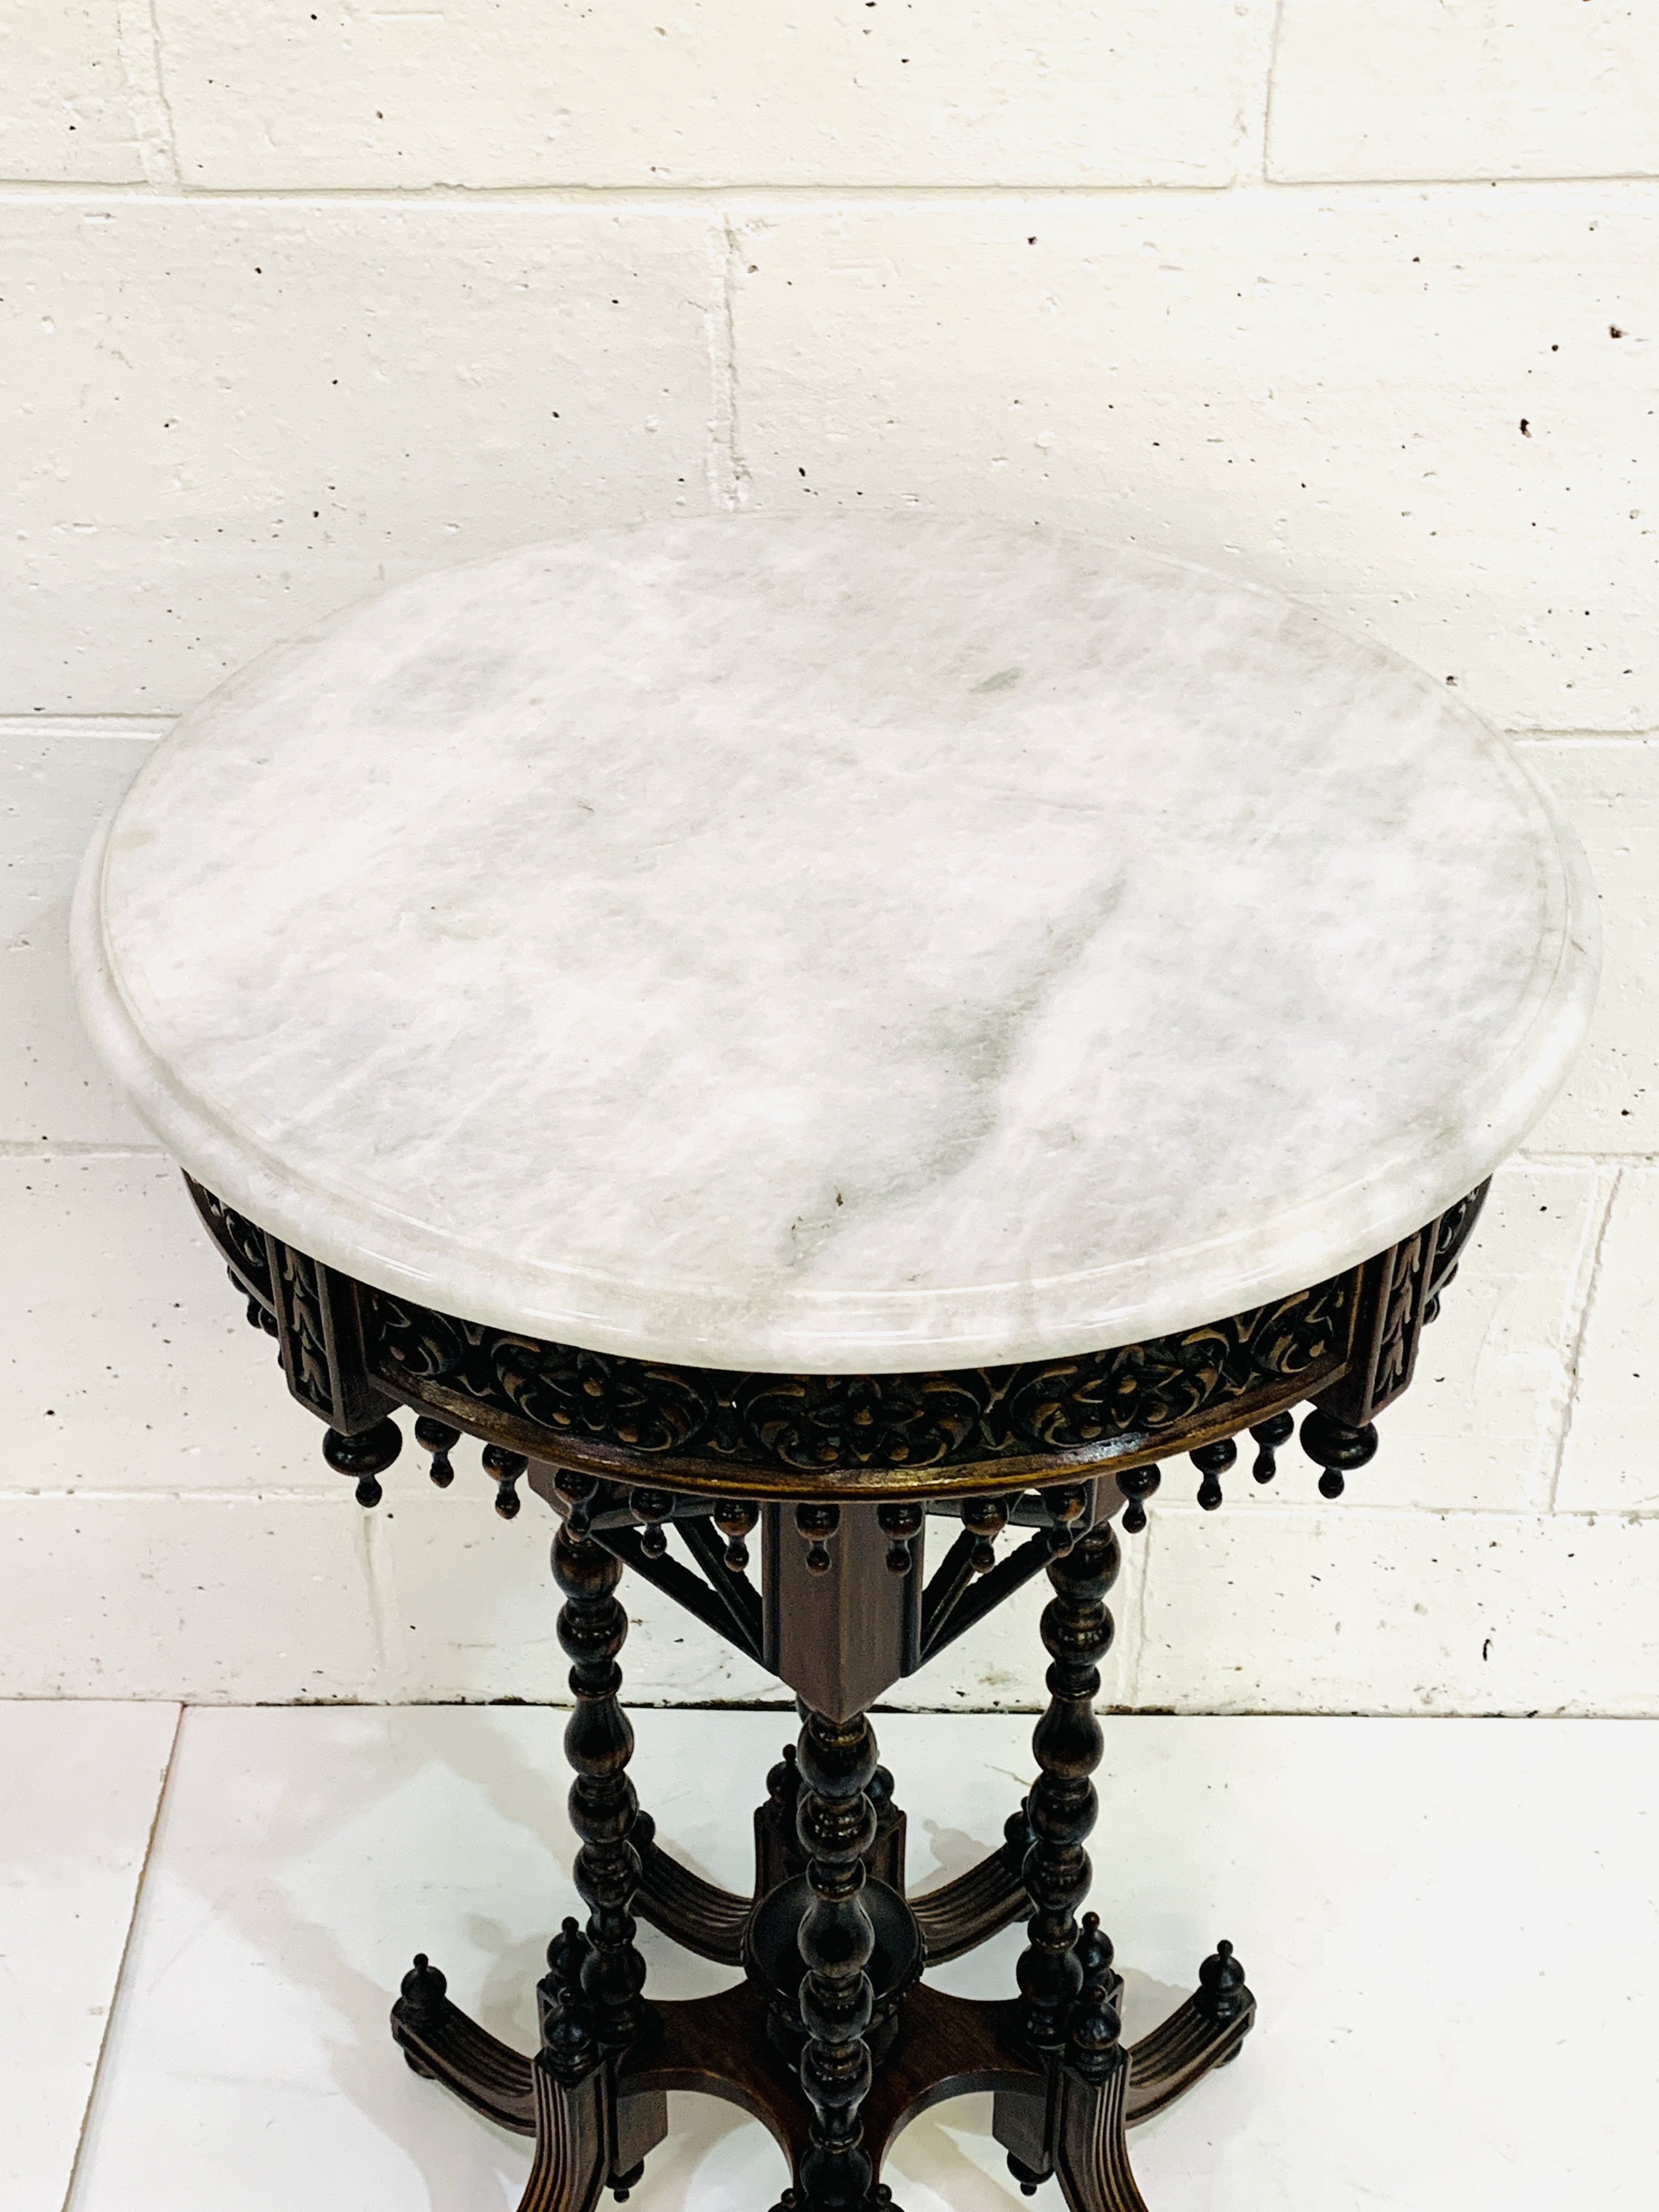 Ornately carved marble topped display table - Image 2 of 6